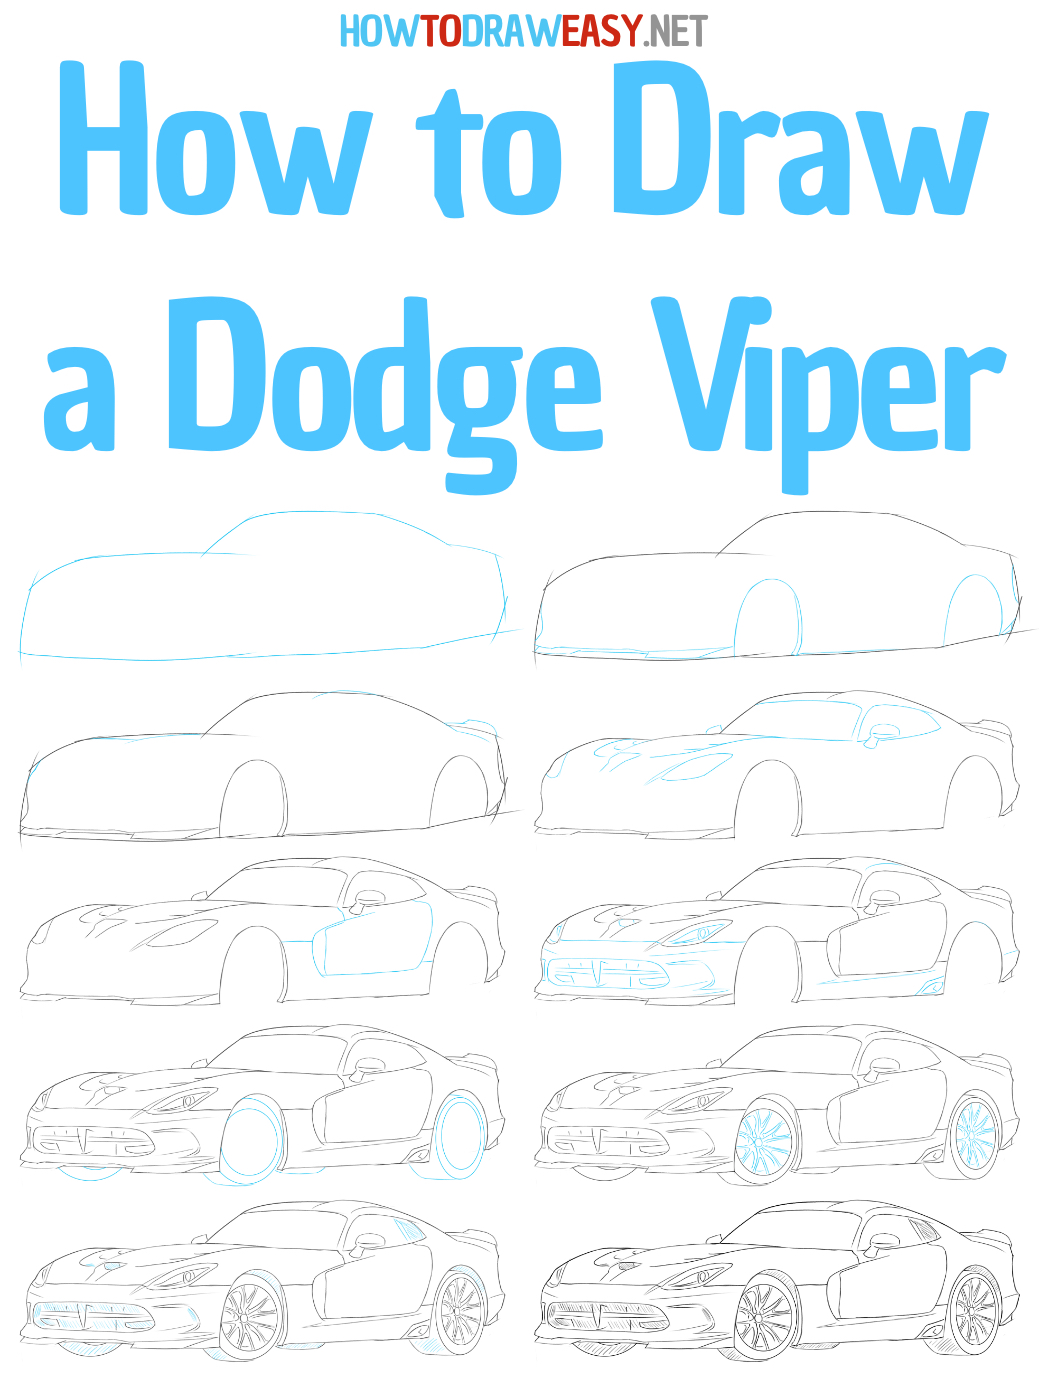 how to draw a dodge viper step by step